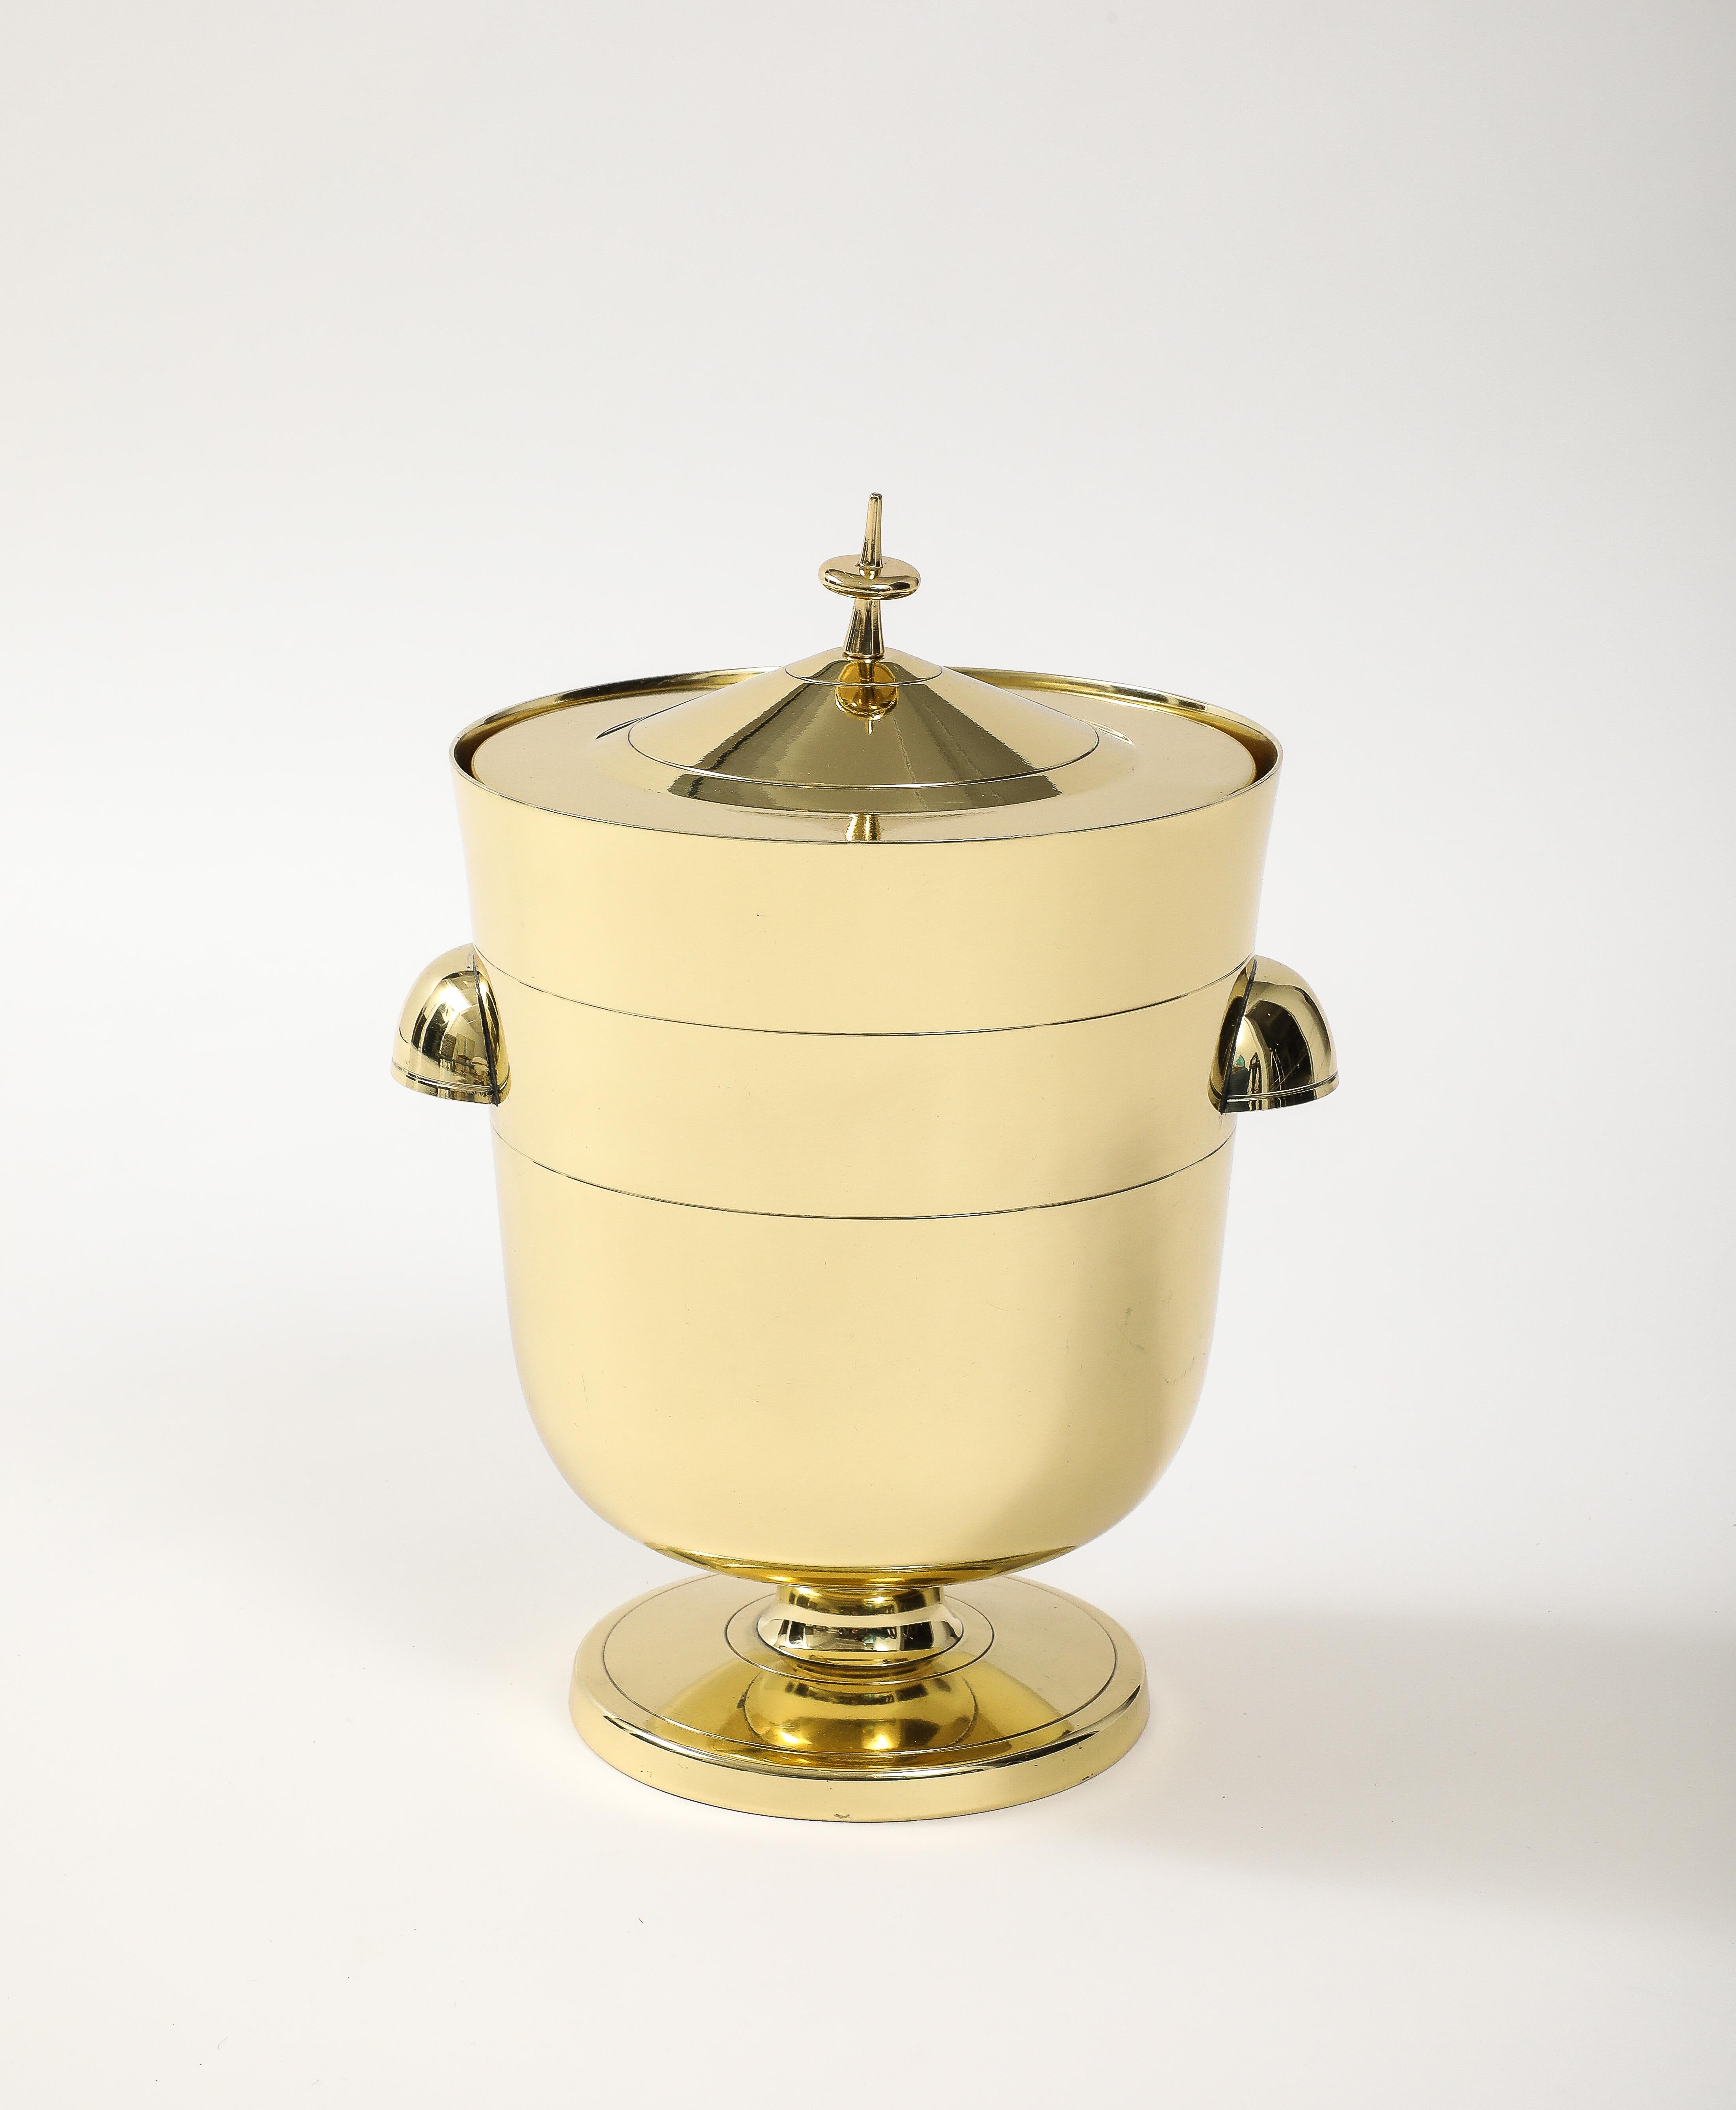 Tommi Parzinger modernist brass ice bucket featuring a mercury glass liner and a finial top on lid. Professionally polished and lacquered.